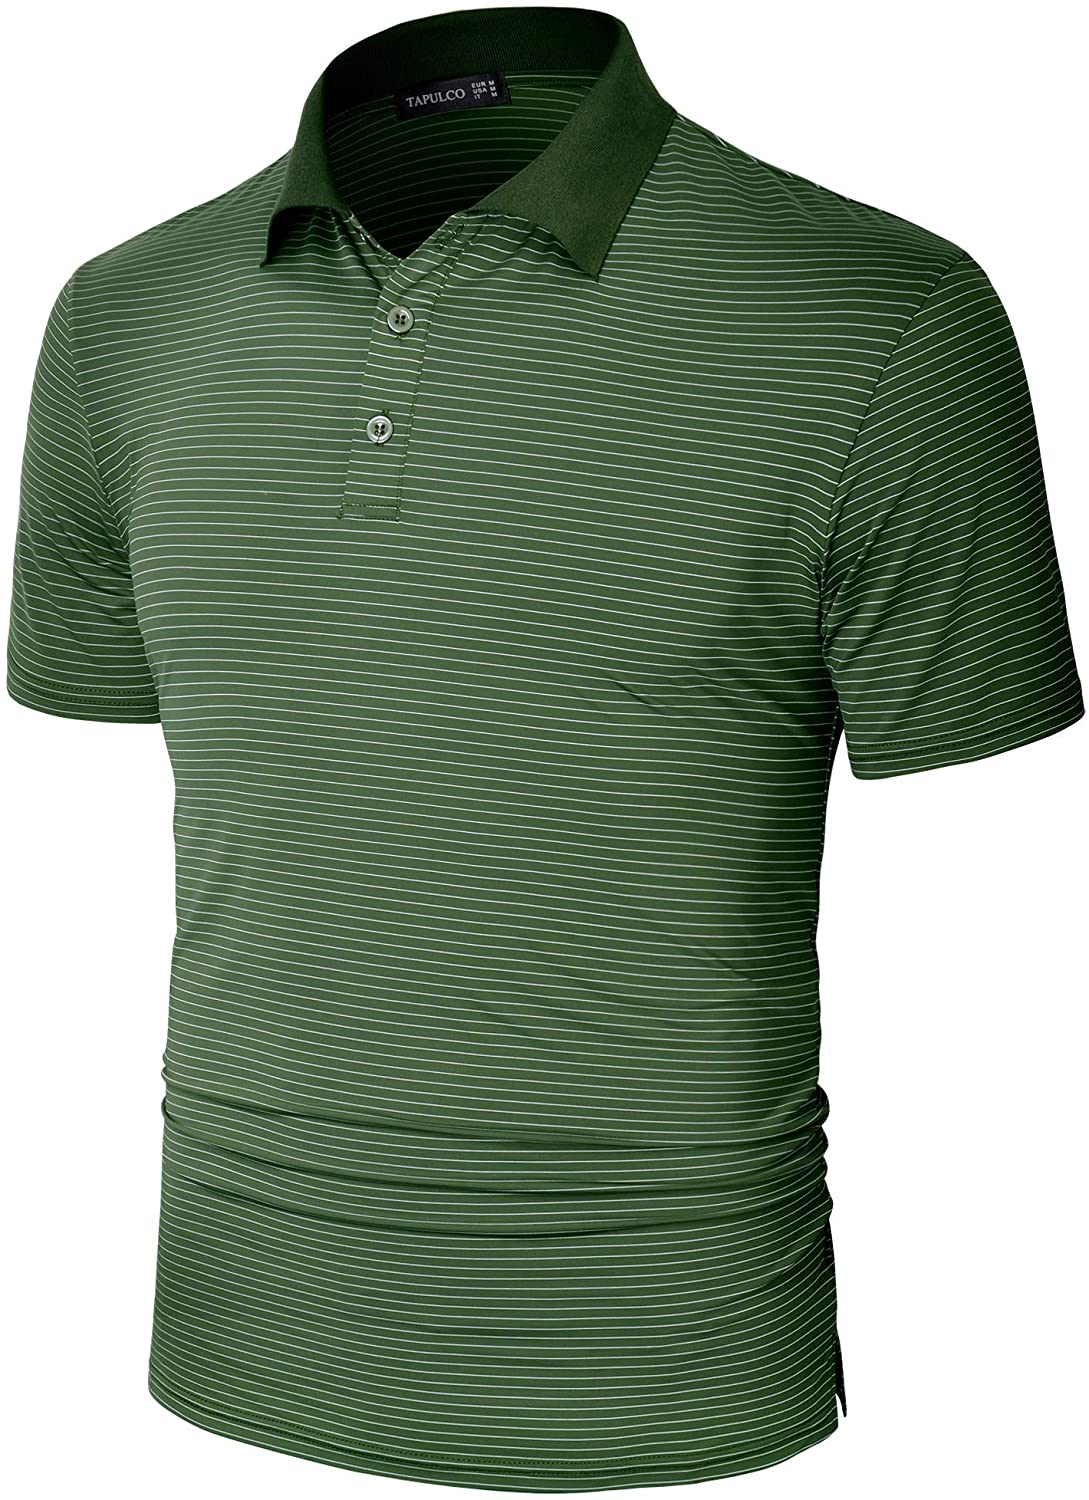 TAPULCO Dry Fit Golf Shirts for Men Stretch Tech Performance Ventilated ...